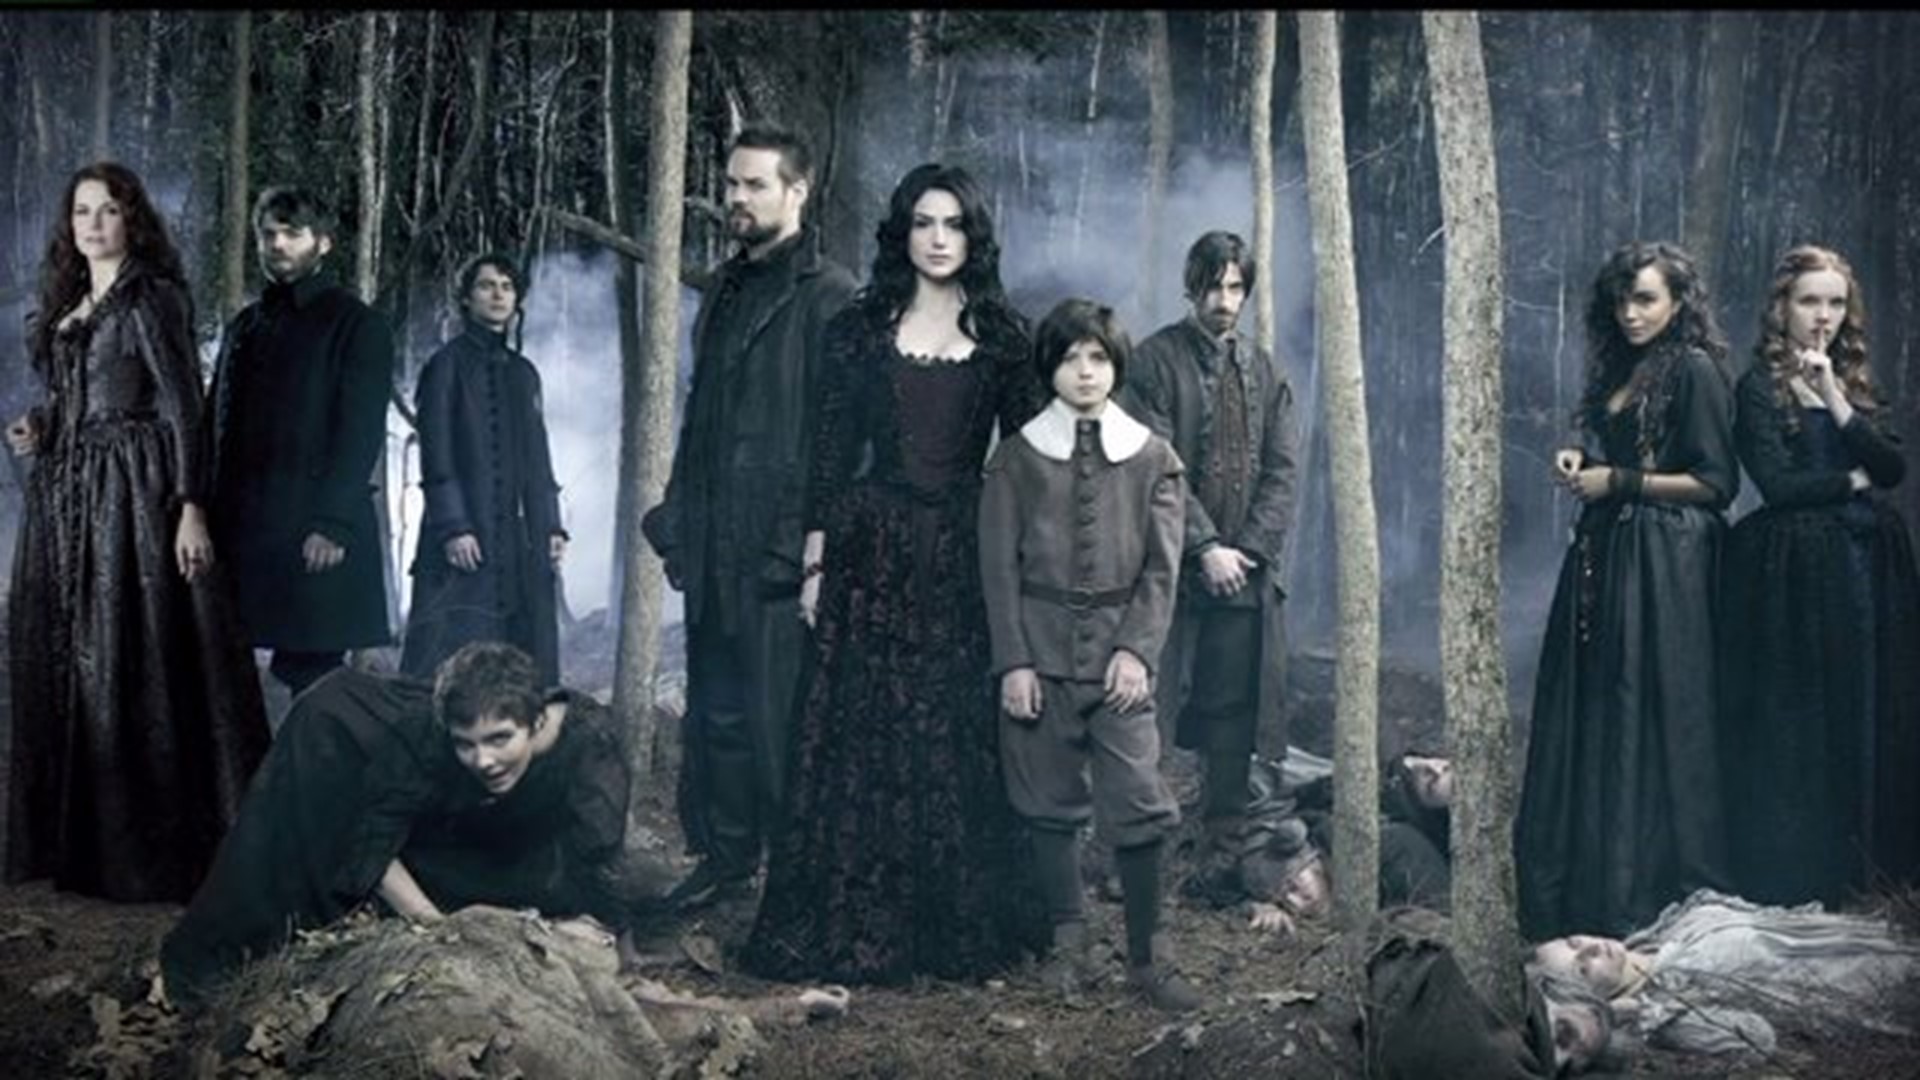 Previewing the New Season of "Salem"